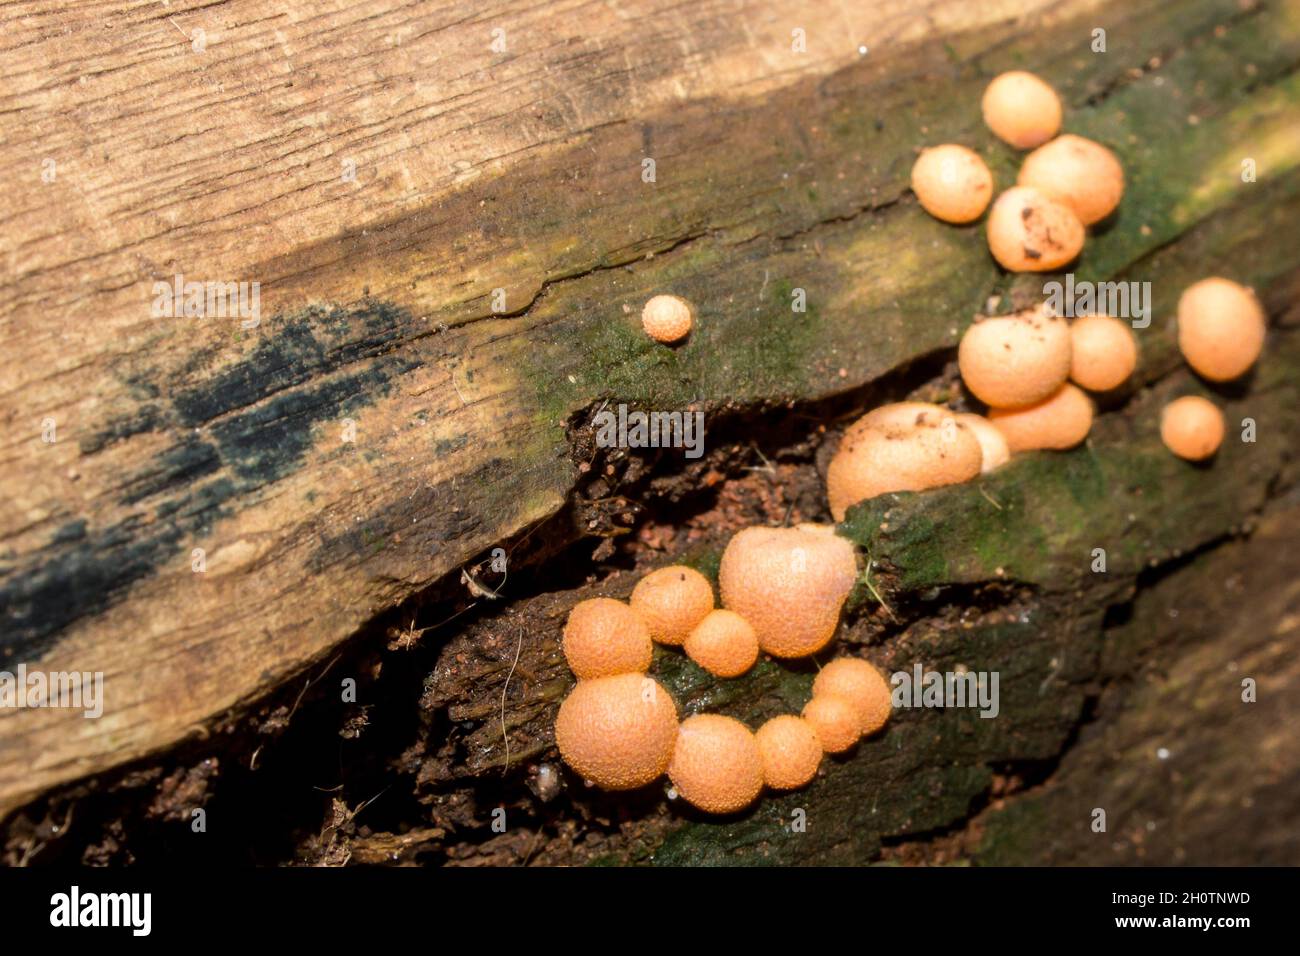 Orange colored balls of Lycogala epidendrum, commonly known as wolf's milk, which is a type of slime mold Amoeba commonly mistaken for a fungus Stock Photo